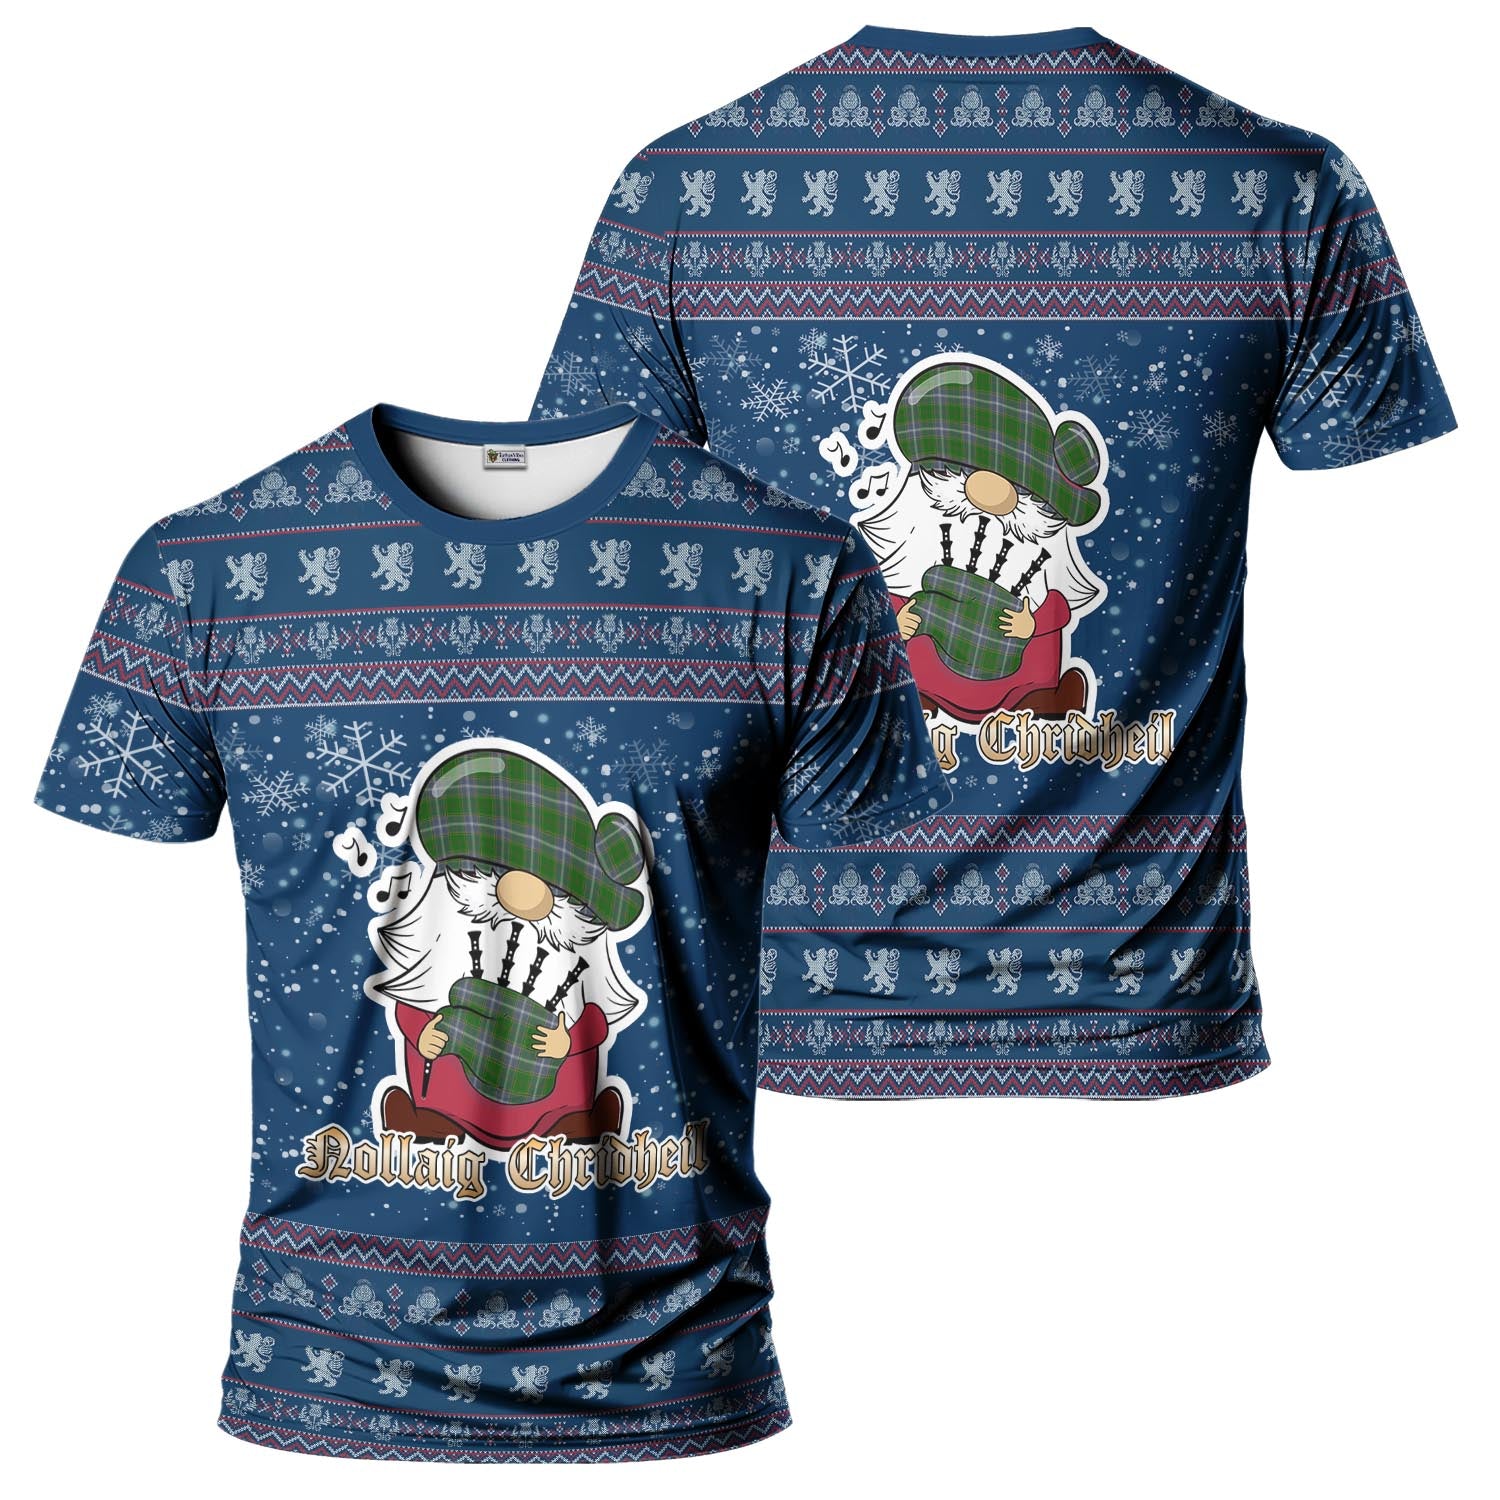 Pringle Clan Christmas Family T-Shirt with Funny Gnome Playing Bagpipes Kid's Shirt Blue - Tartanvibesclothing